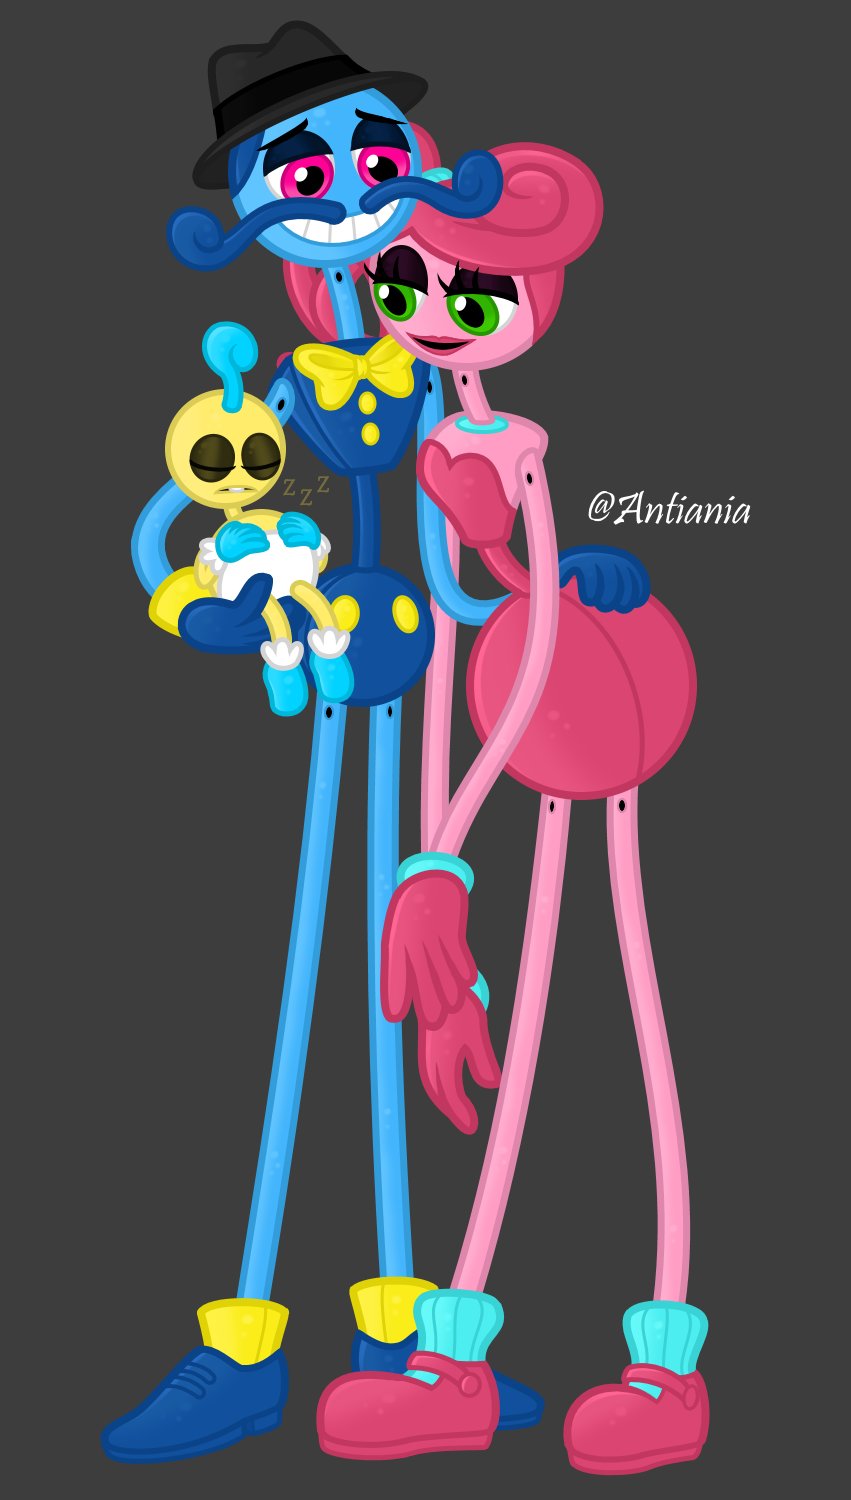 daddy and baby long legs my fanart before official photo realse vs official  photo : r/PoppyPlaytime